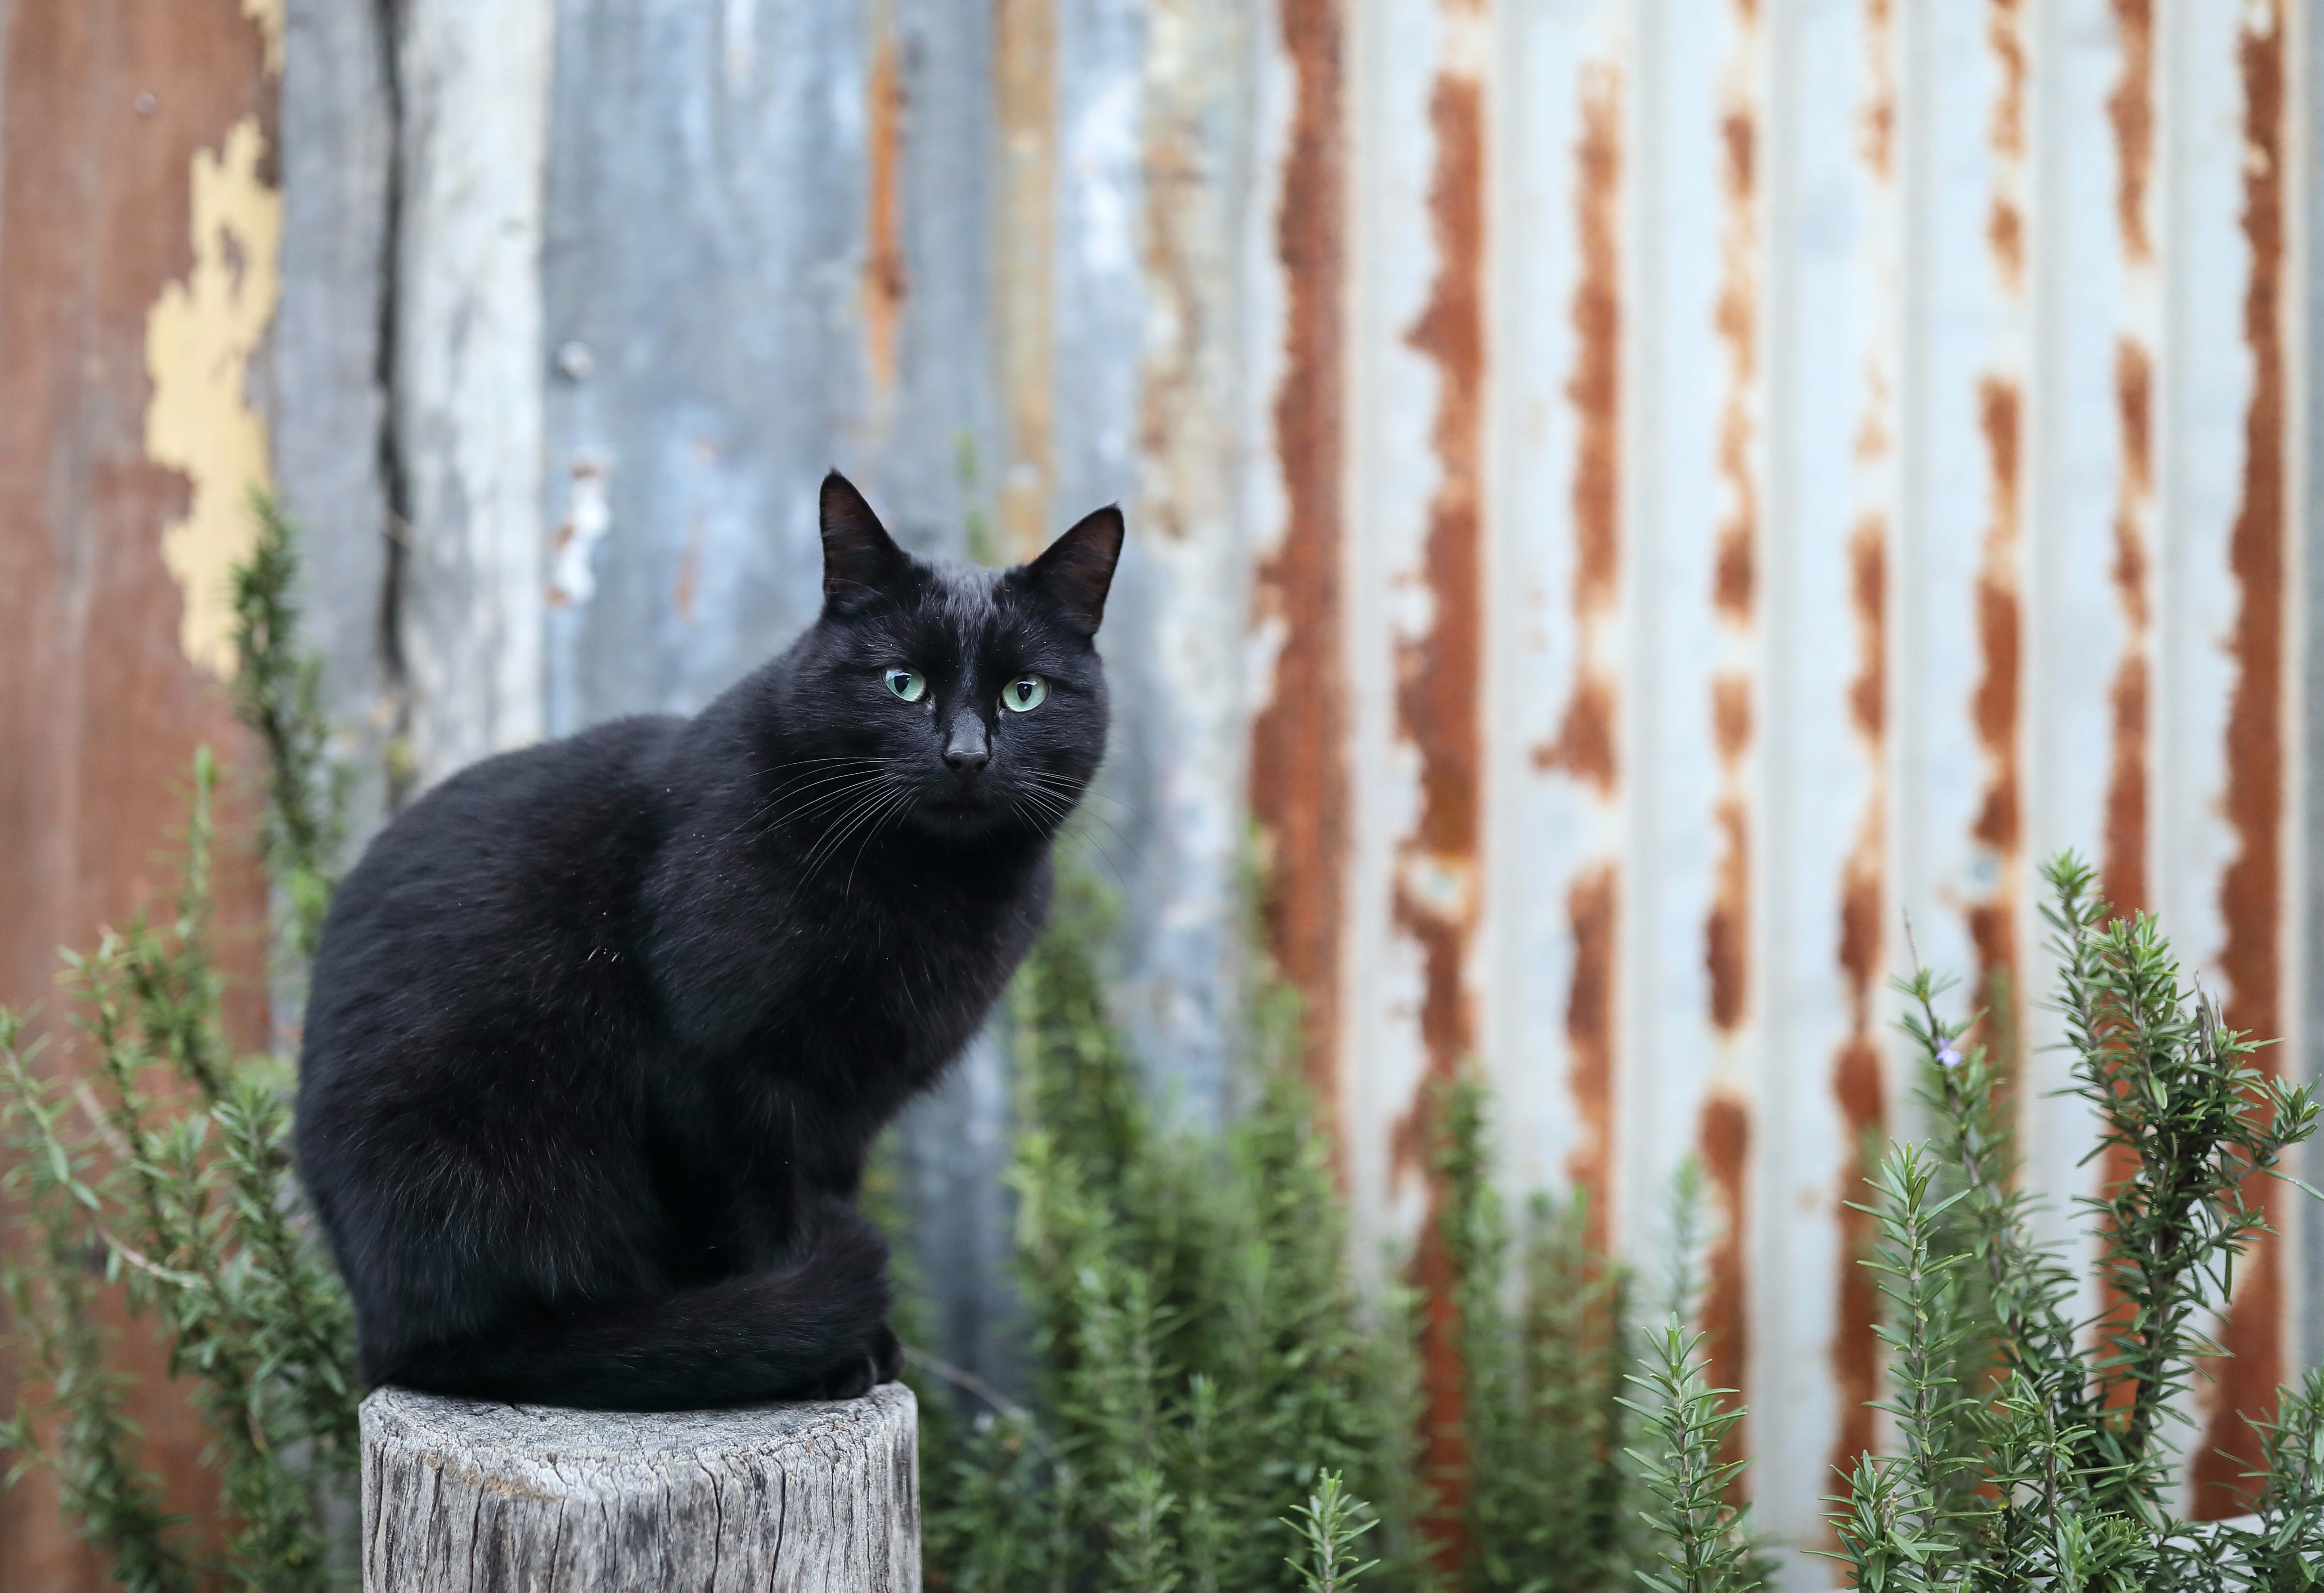 Photo of black cat sitting on tree stump next to shed taken by Dr. Chris Brown